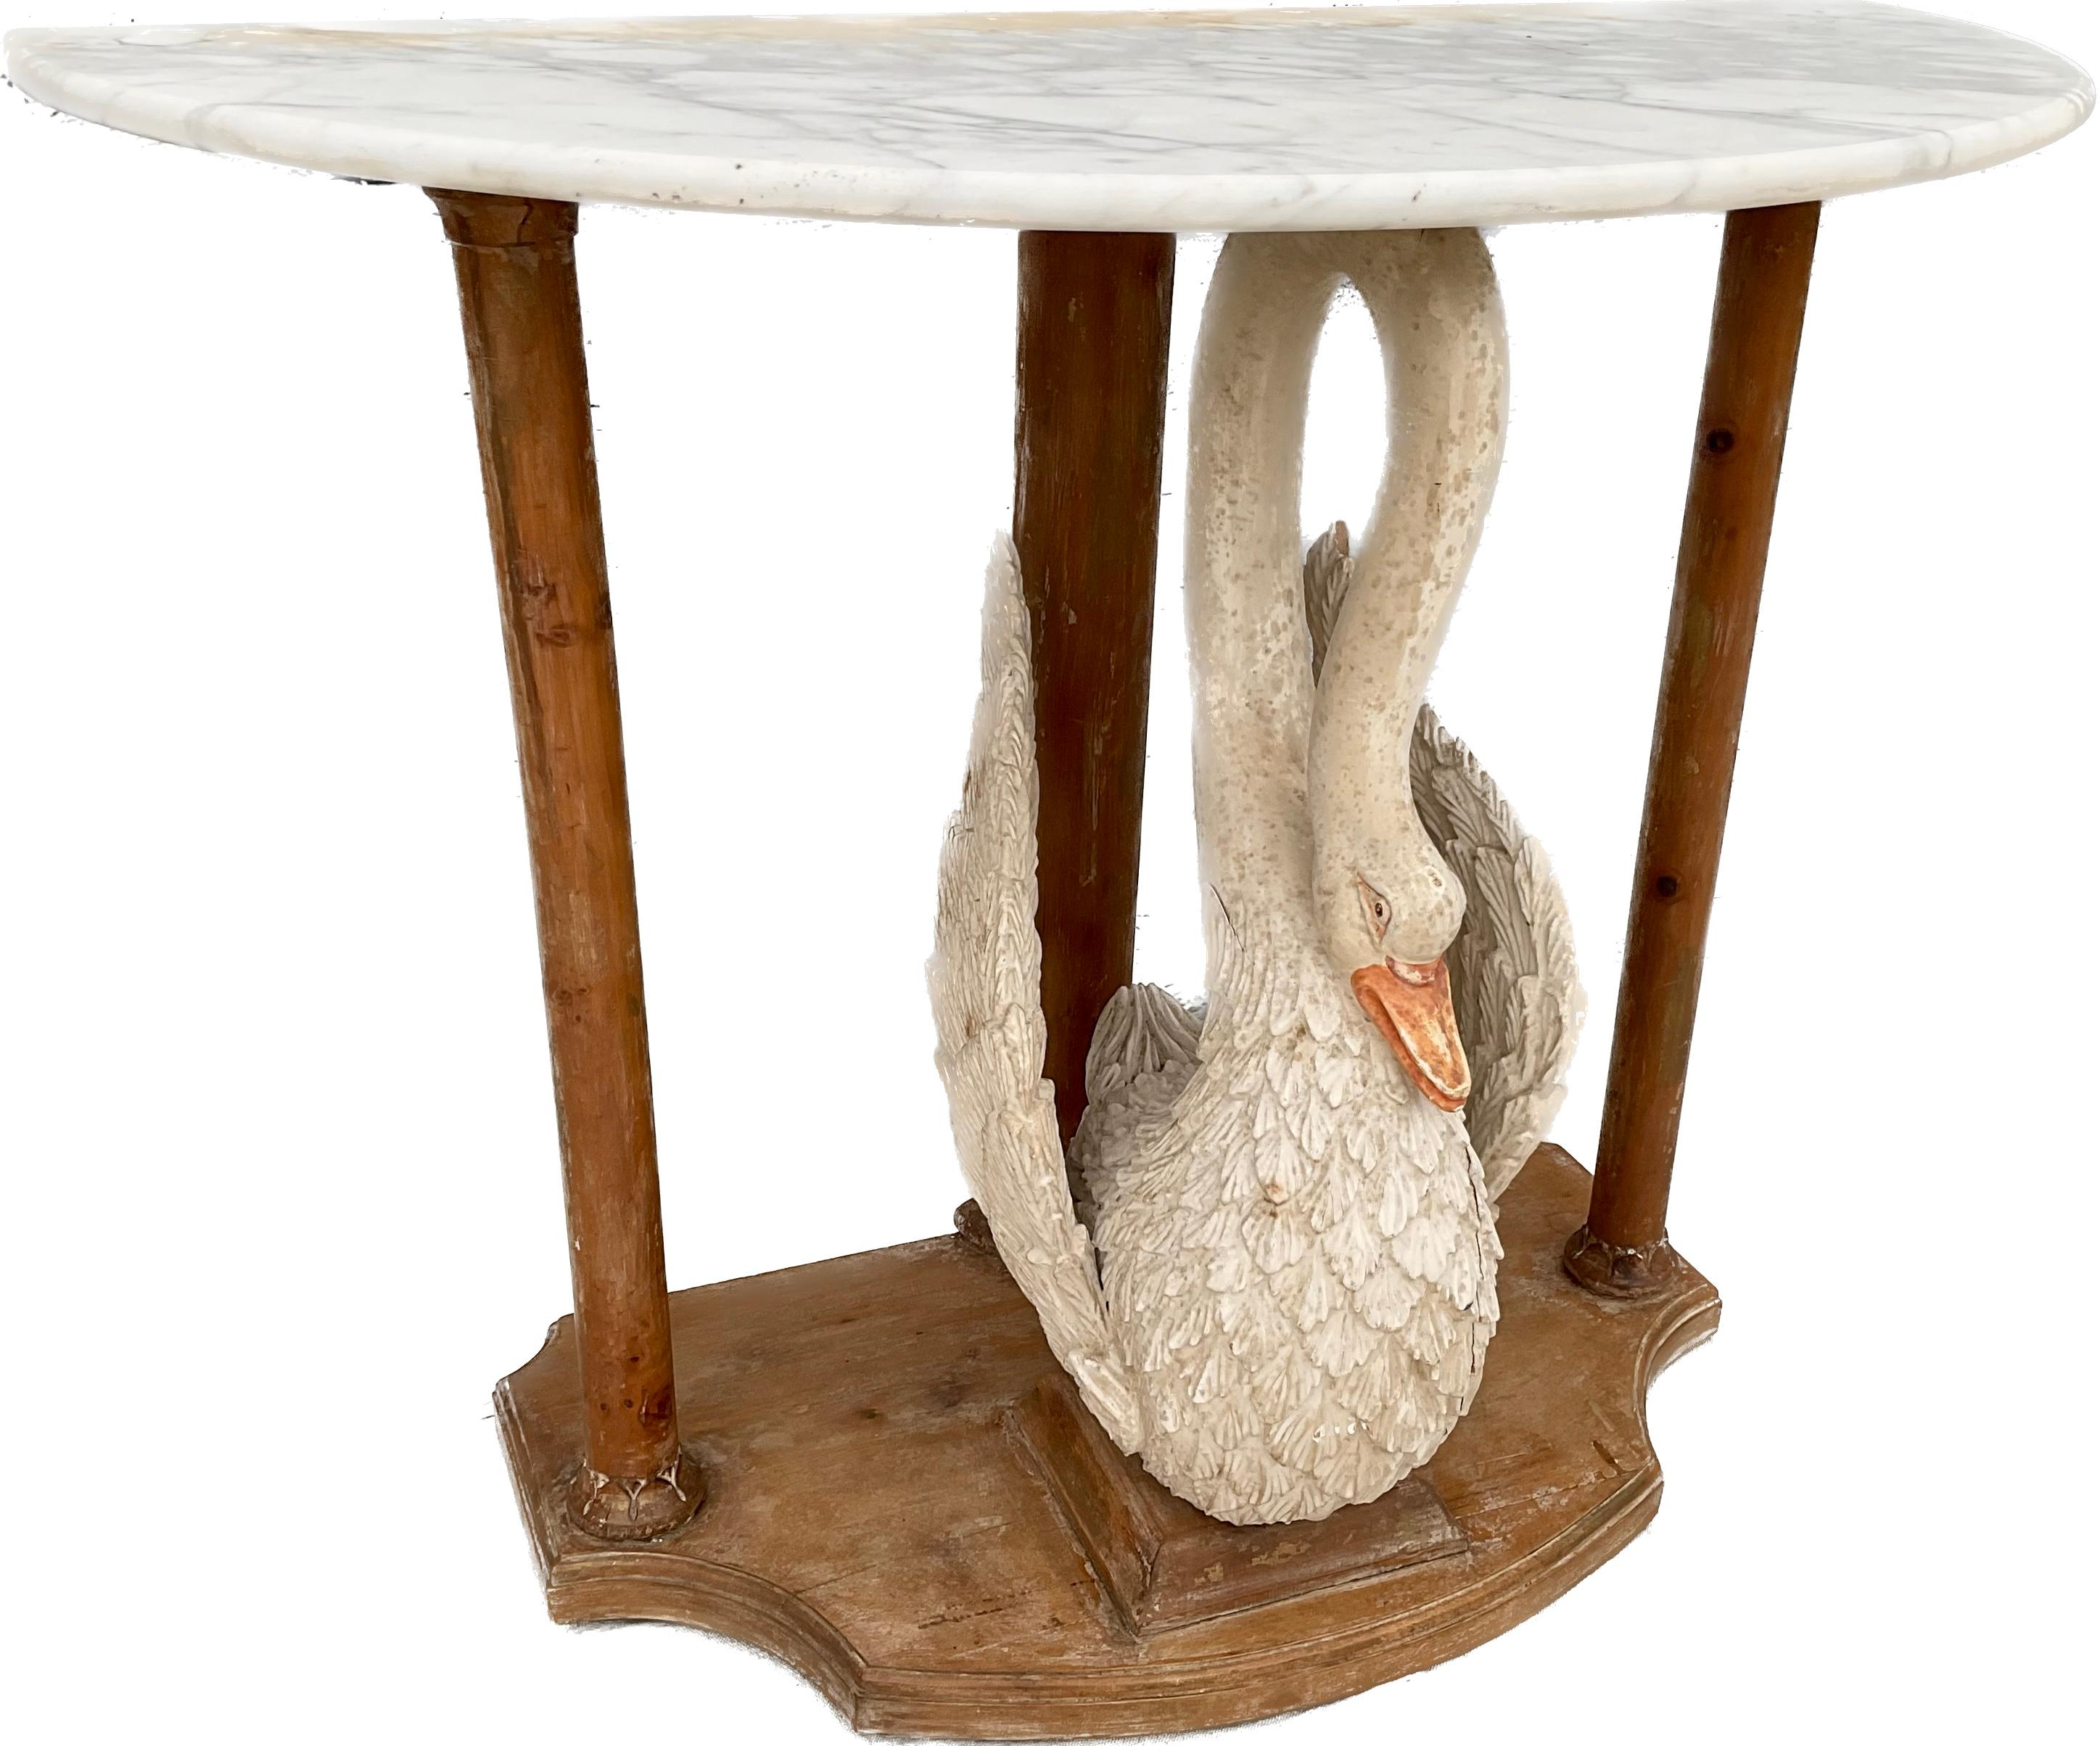 Unique mid-century hand carved and polychrome painted Swan console table. Table features a Carrara marble top on three columnar supports flanking a large beautifully hand carved wooden swan. Swan's colors are off-white with an orange beak. Swan